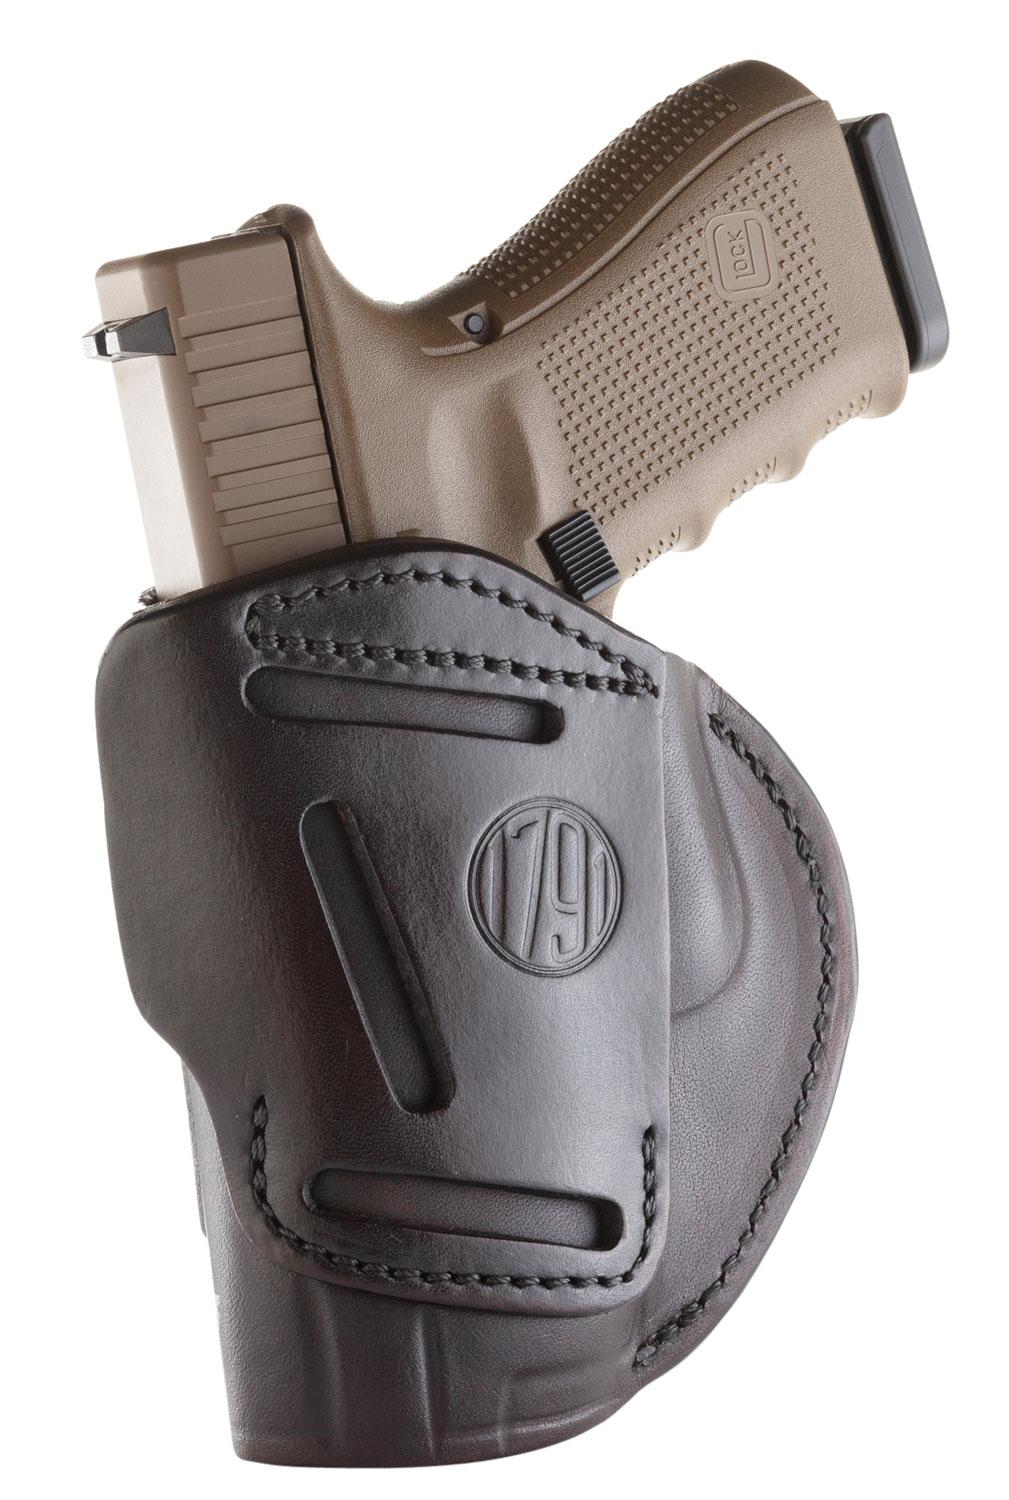 The Four Way Holster